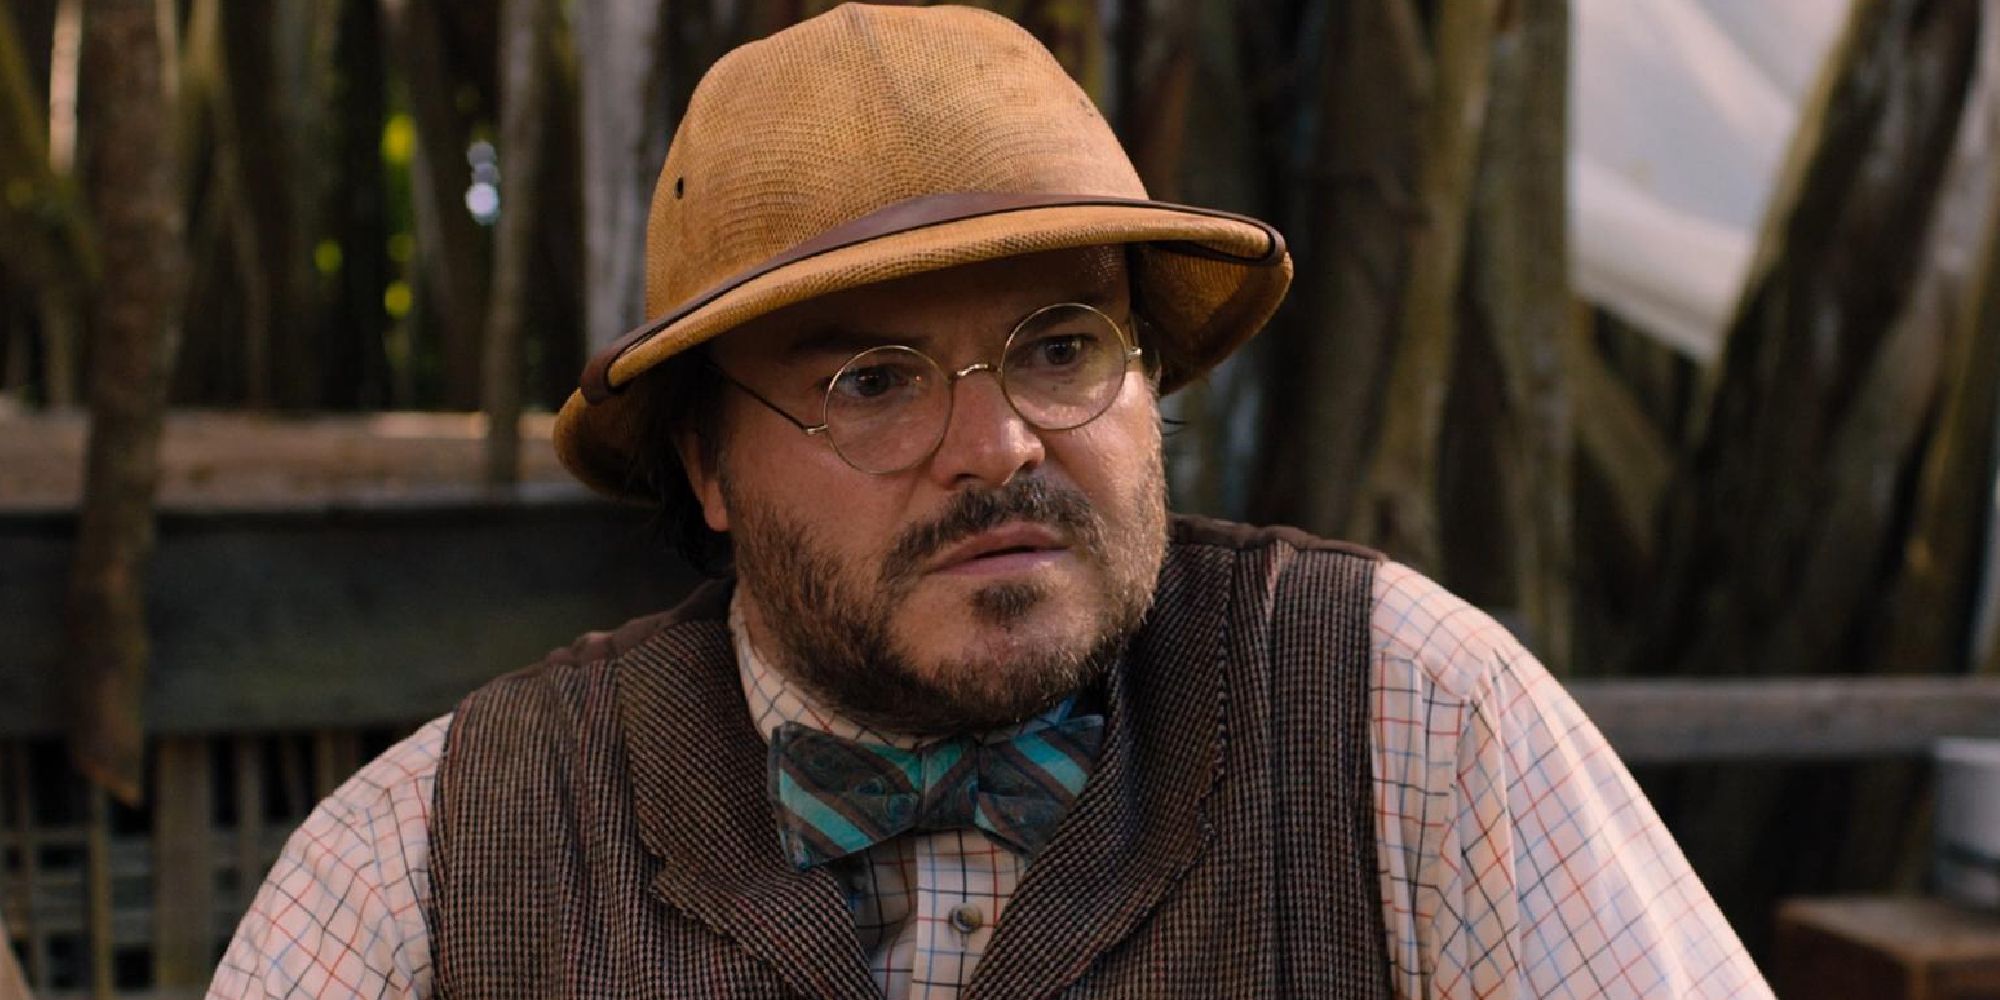 Jack Black as Professor Sheldon "Shelly" Oberon looking somber in Jumanji: Welcome to the Jungle